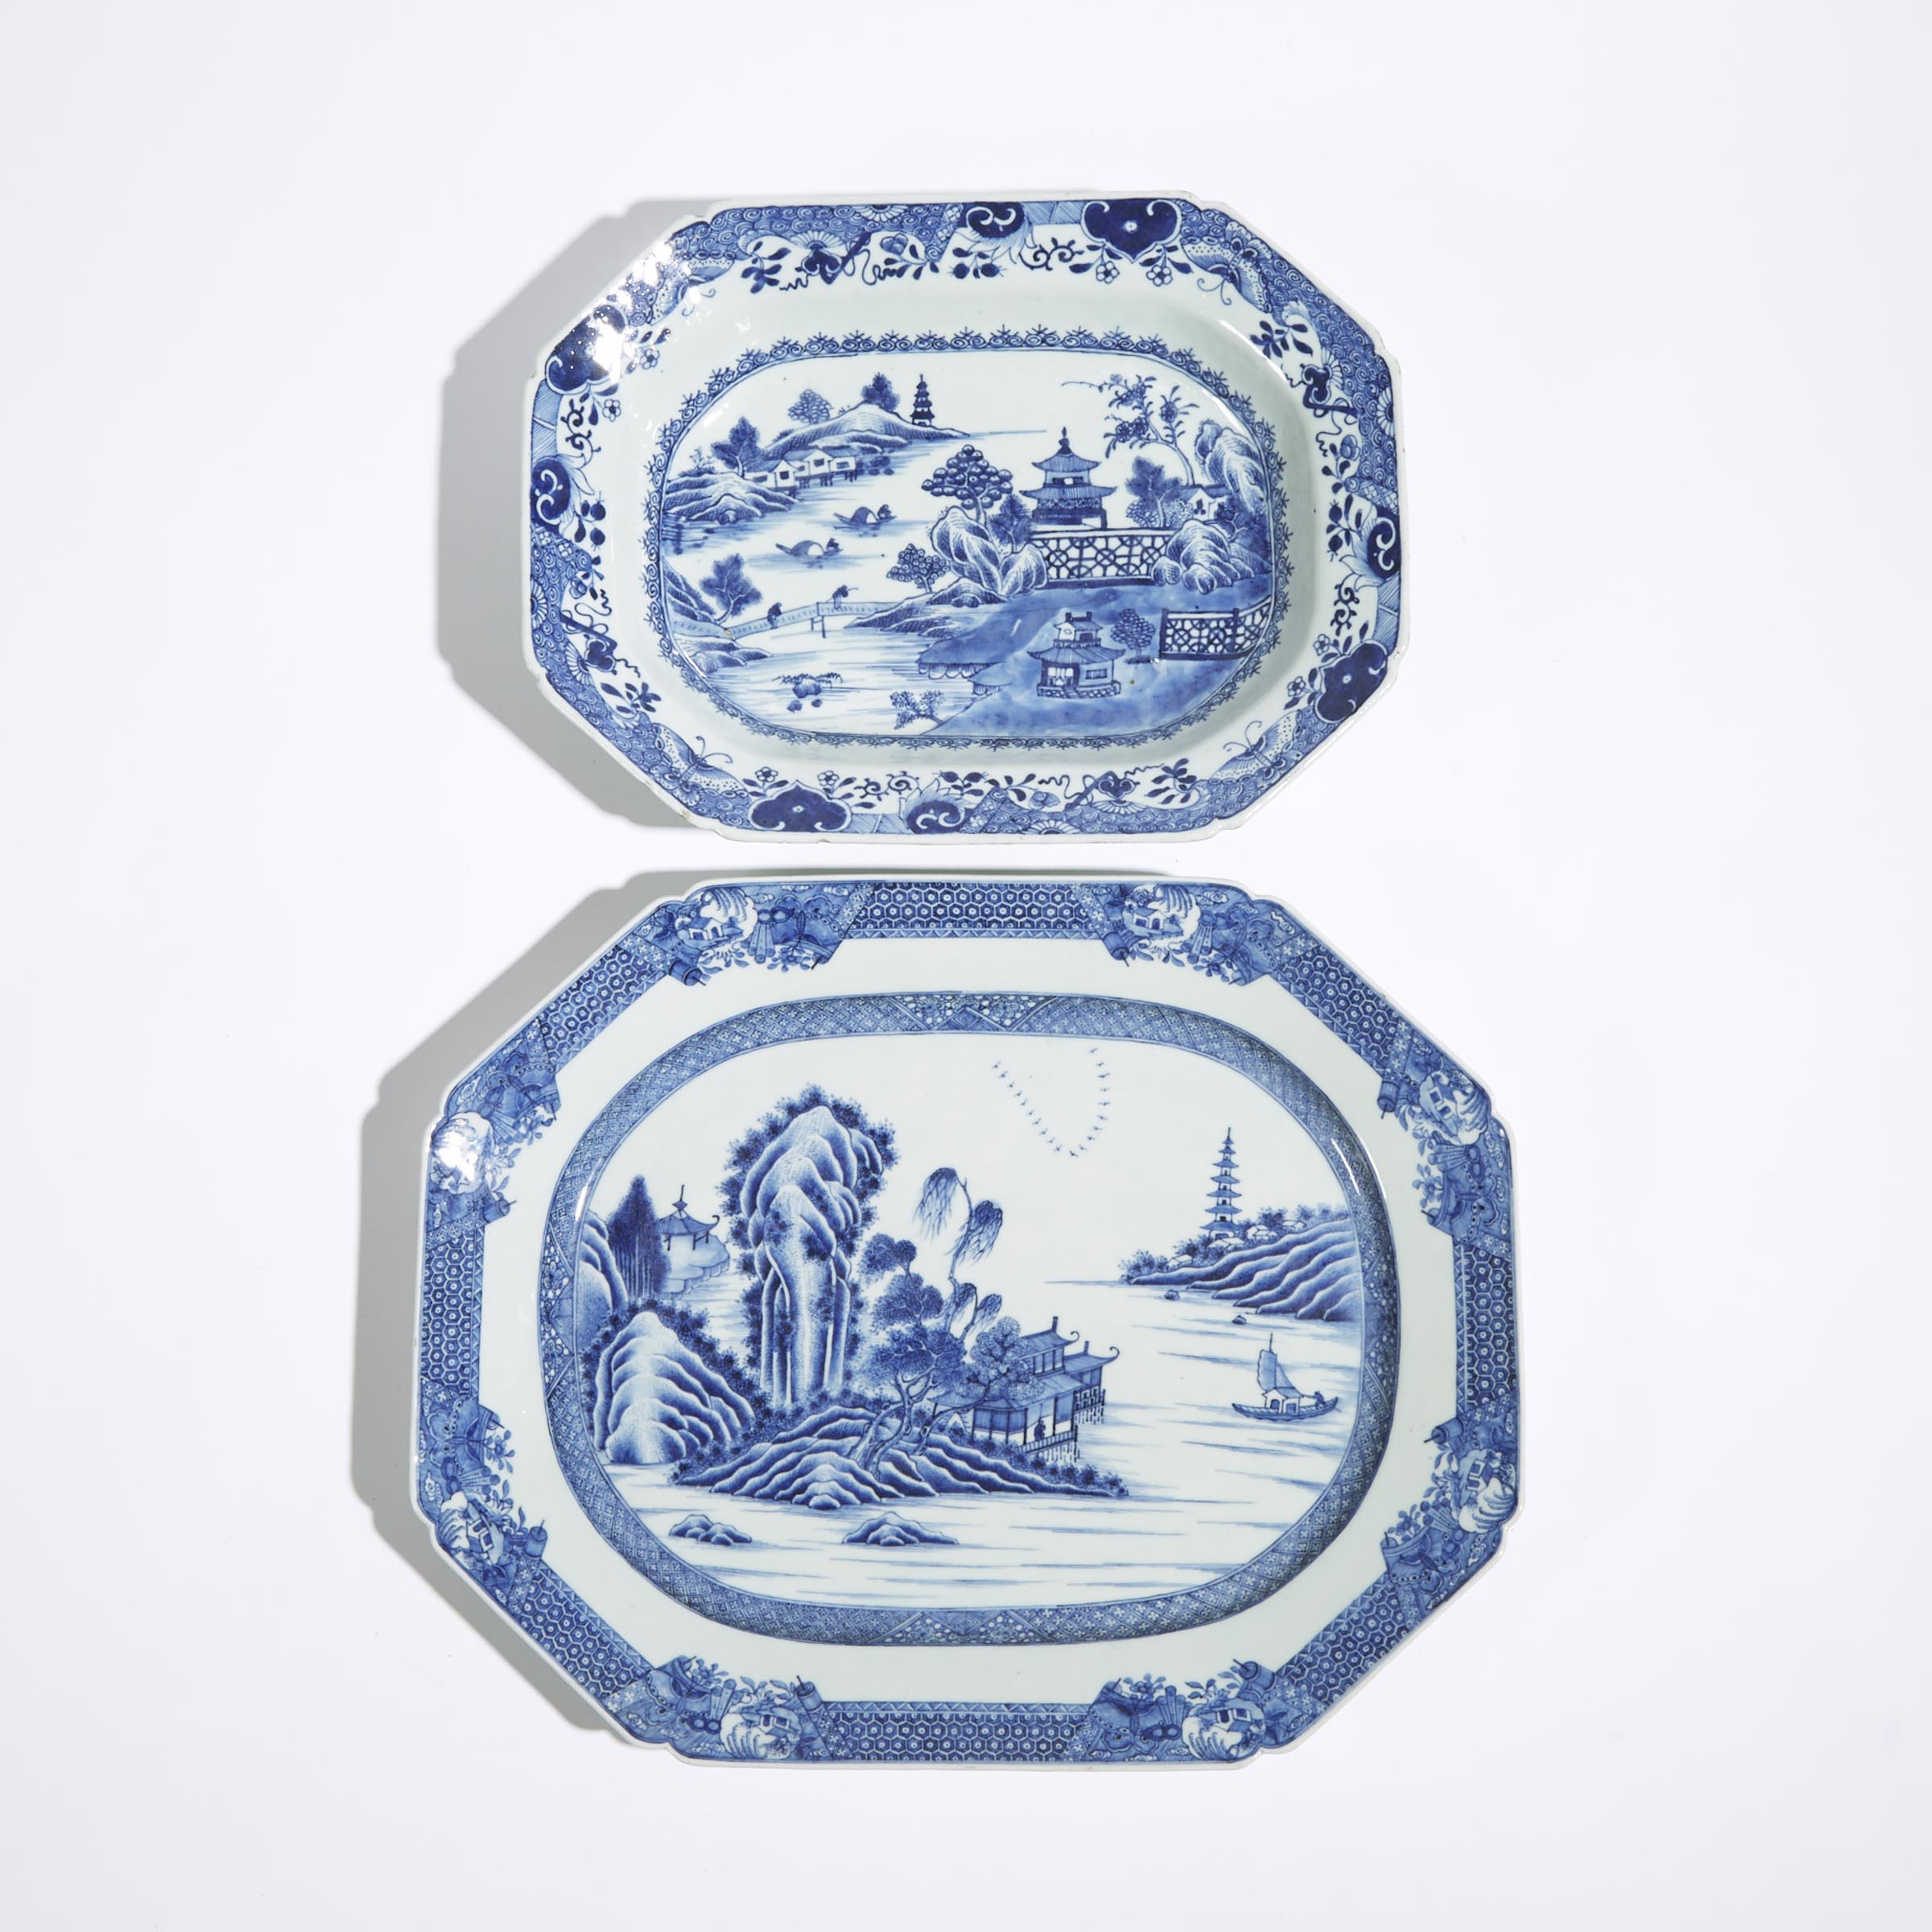 Two Large Export Blue and White 'Landscape' Platters, 18th Century